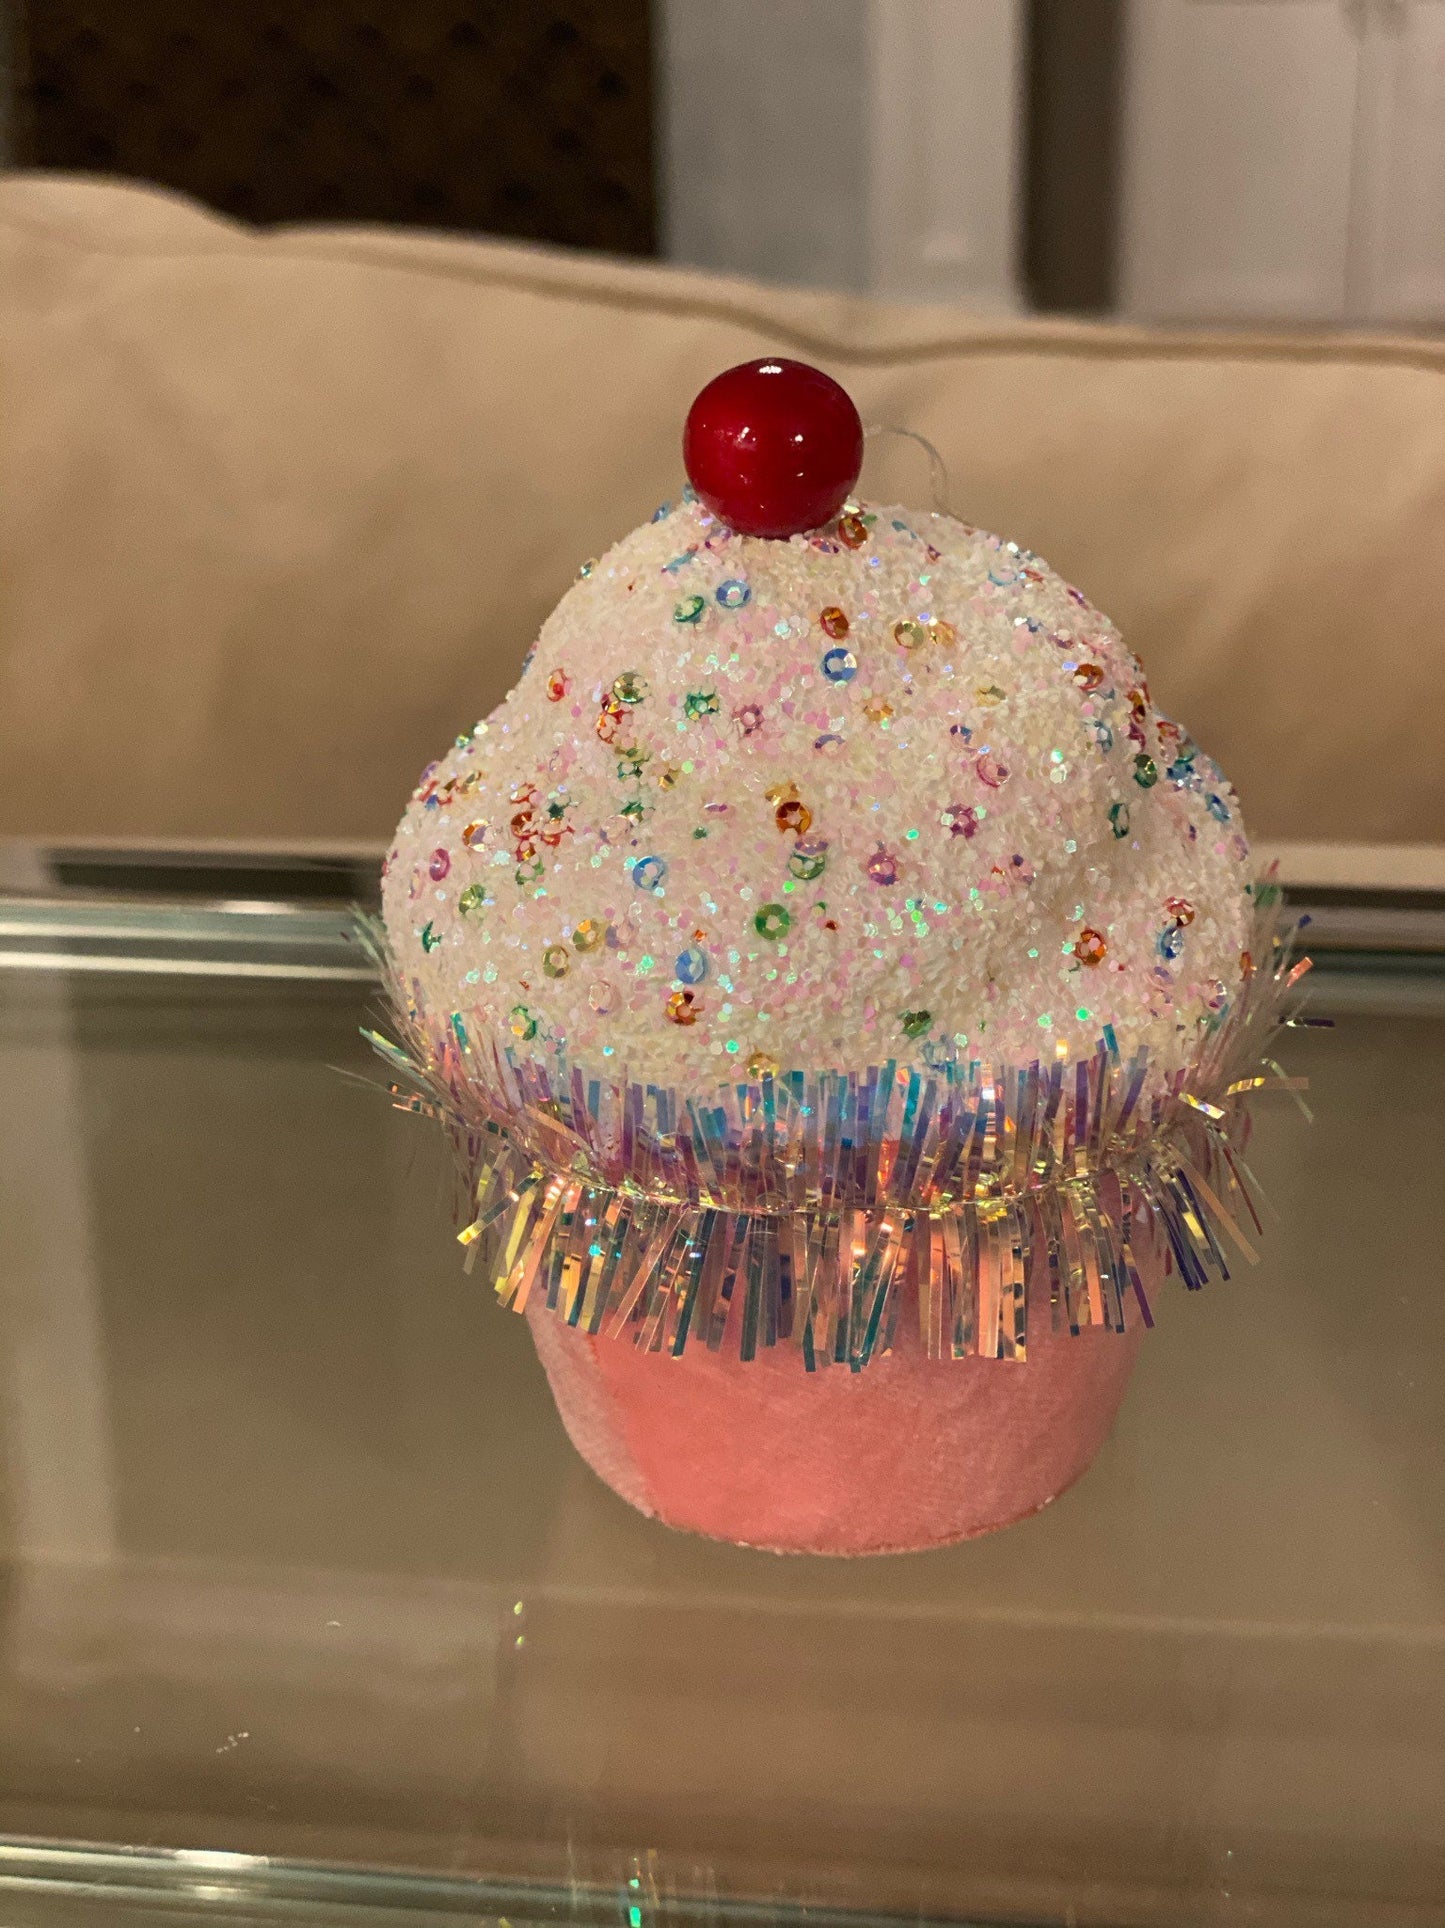 5" Cupcake pink with sprinkles ornament